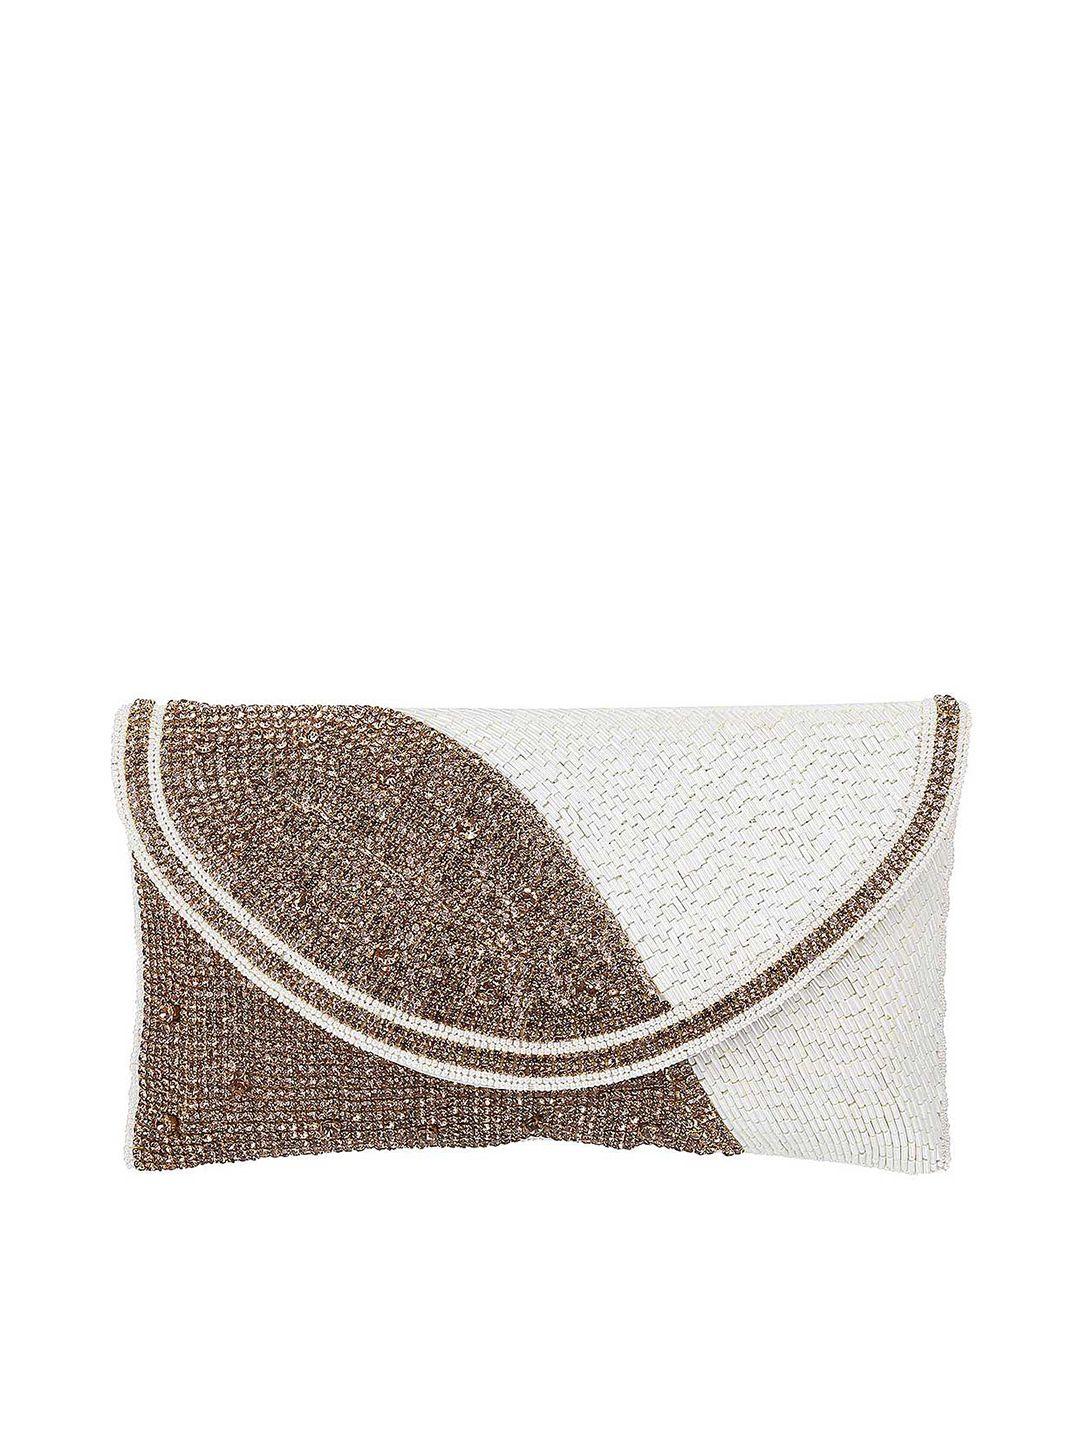 metro off white & gold-toned embellished envelope clutch